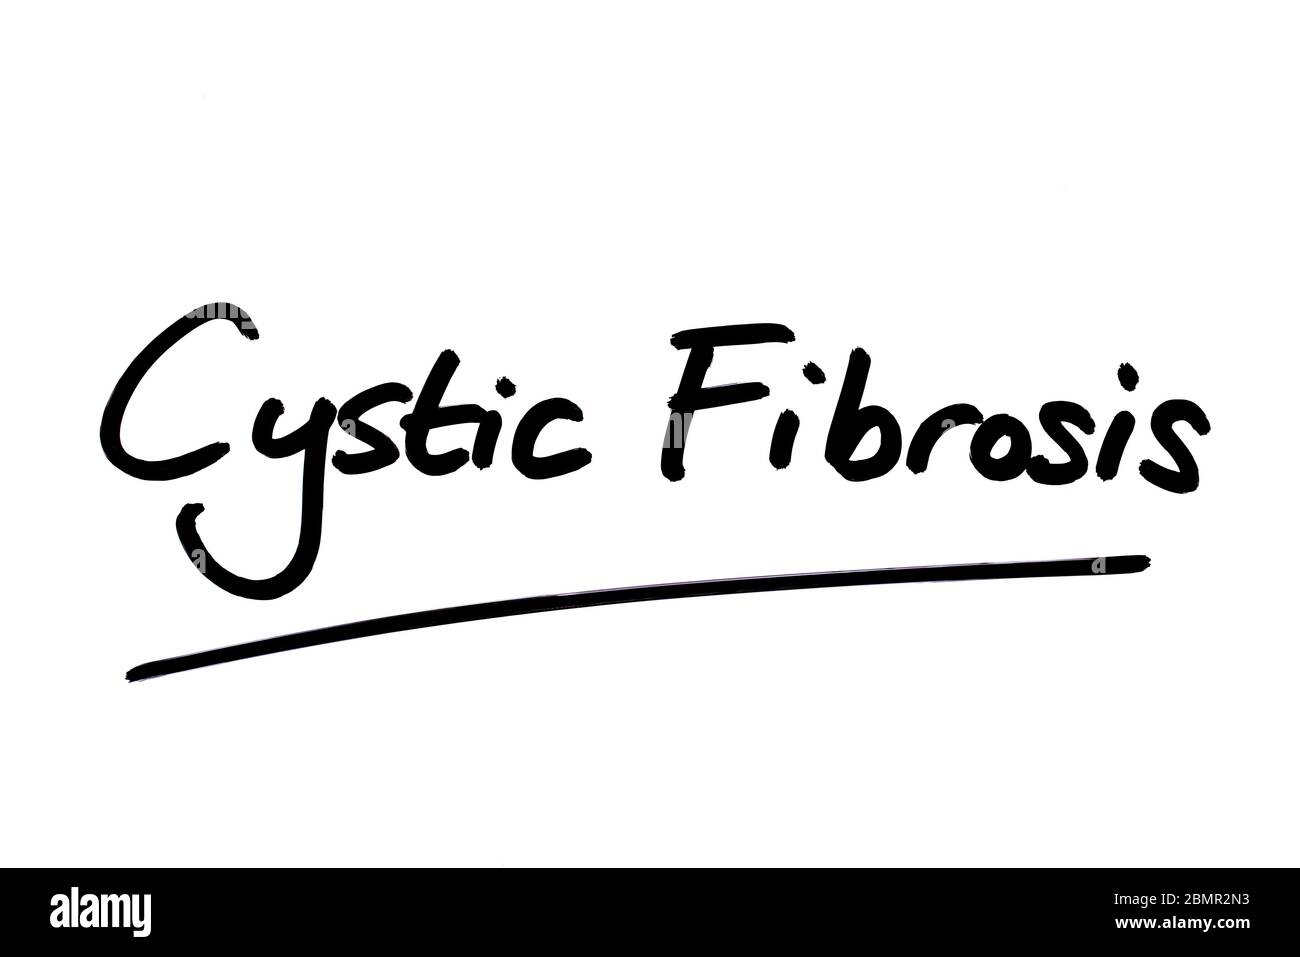 Cystic Fibrosis handwritten on a white background. Stock Photo